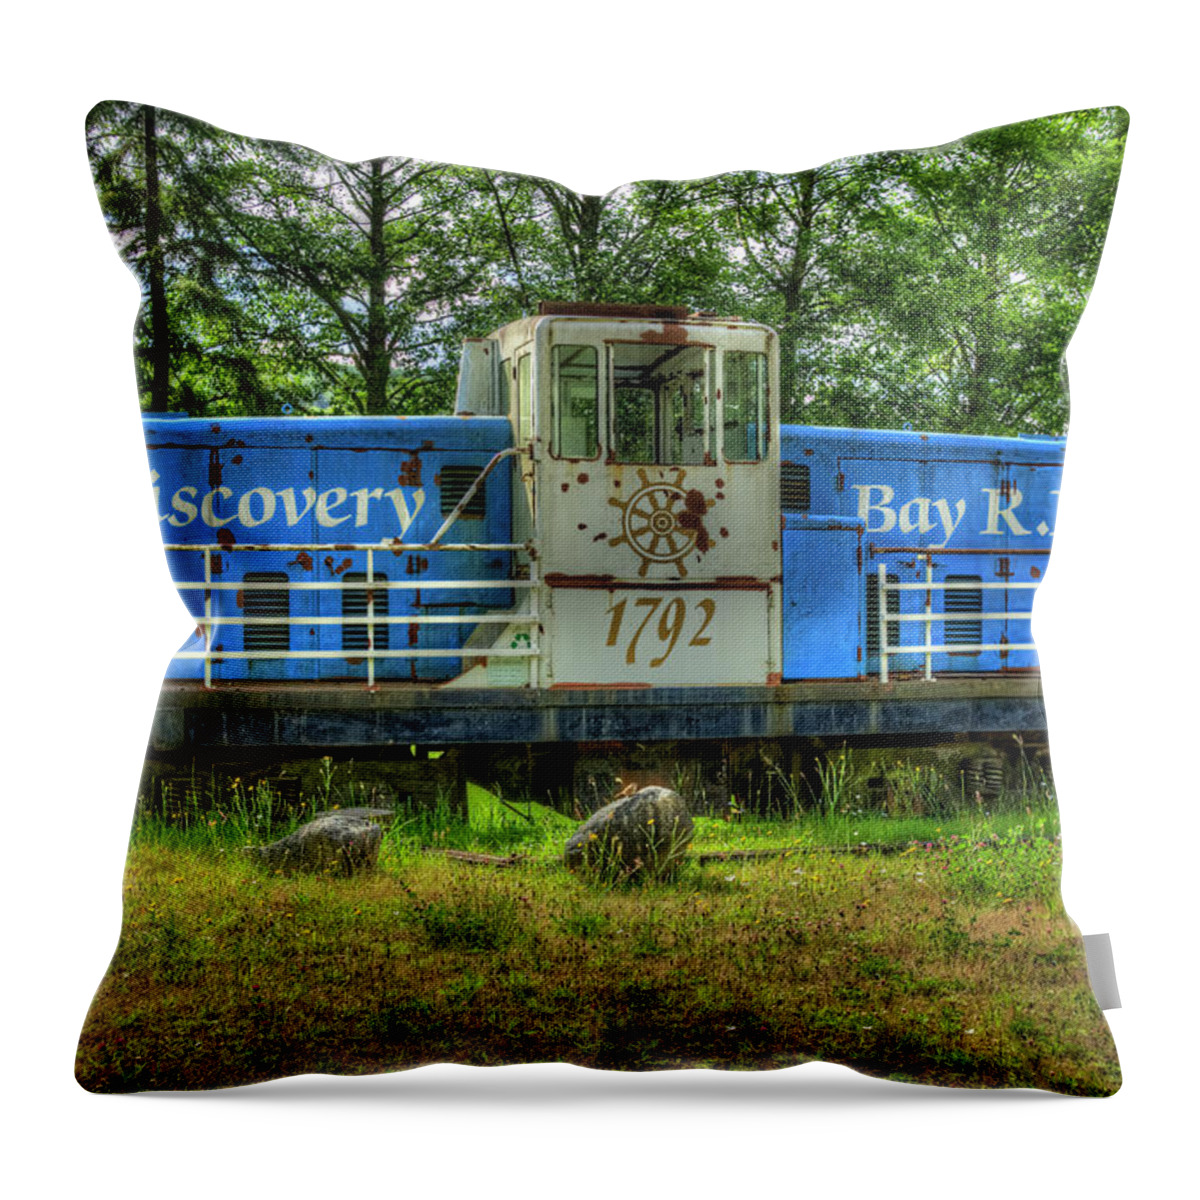 Train Throw Pillow featuring the photograph Discovery Bay Restaurant by Richard J Cassato